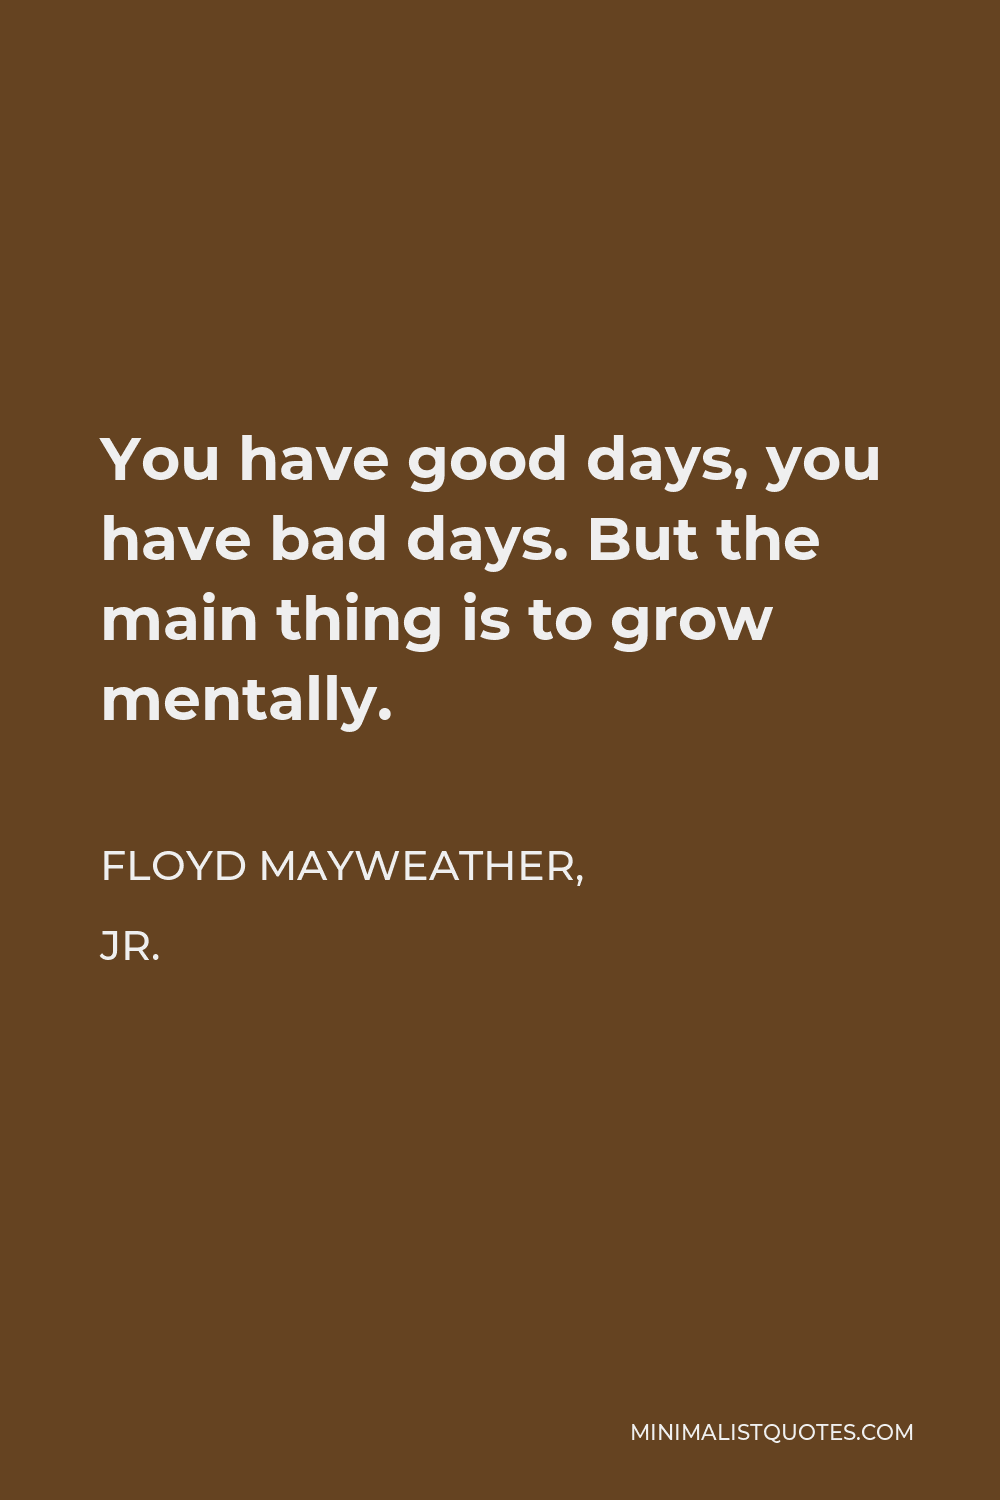 Floyd Mayweather, Jr. Quote - You have good days, you have bad days. But the main thing is to grow mentally.